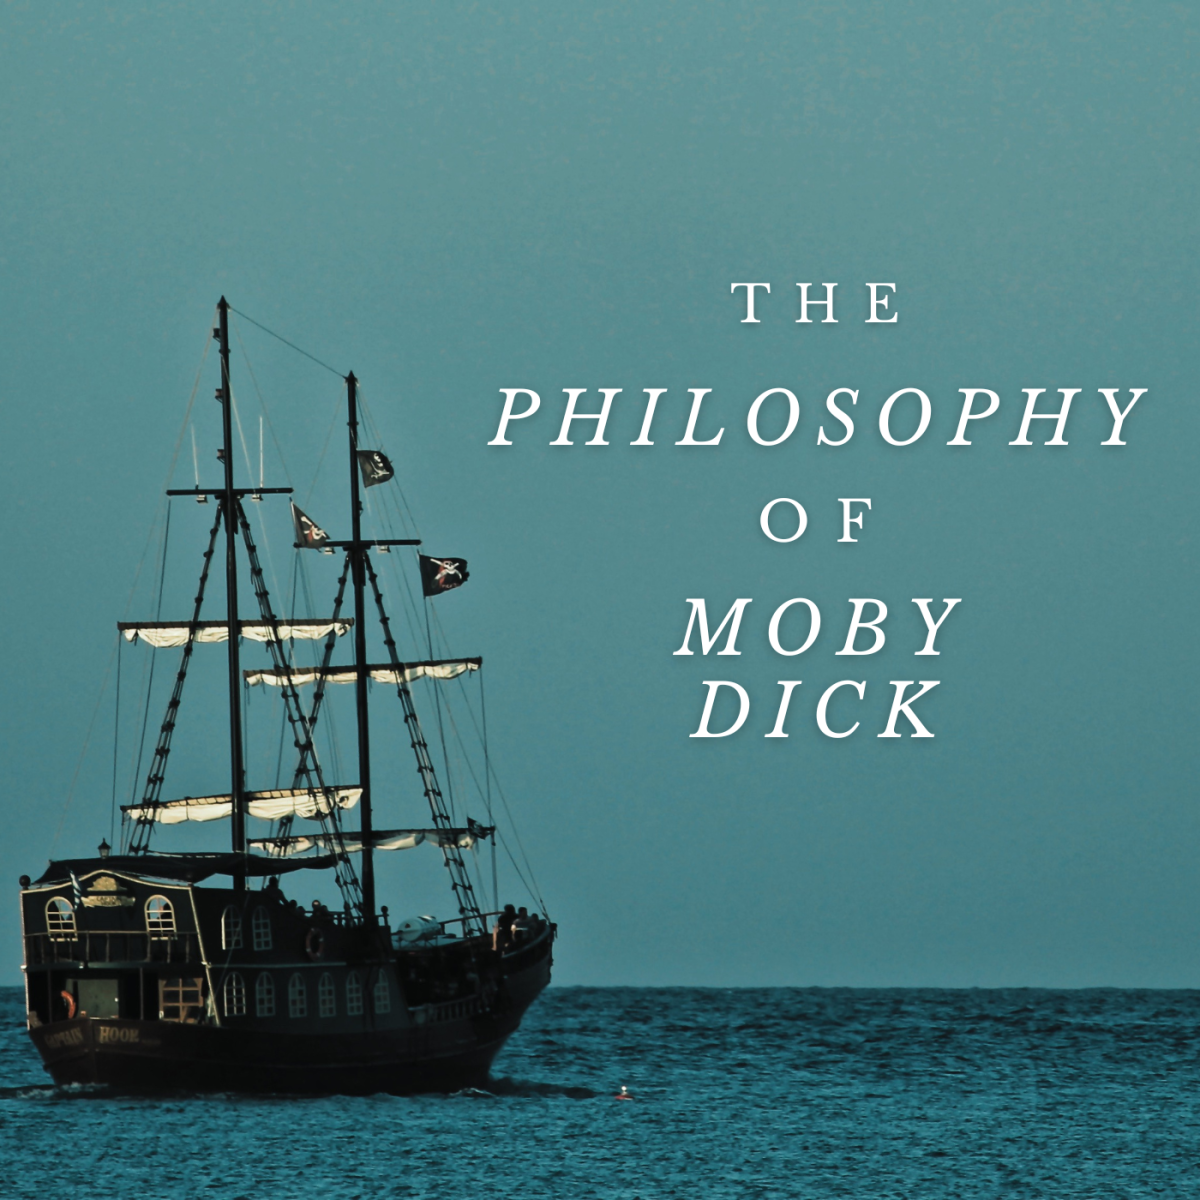 The serious philosophy that occurs in 'Moby Dick'